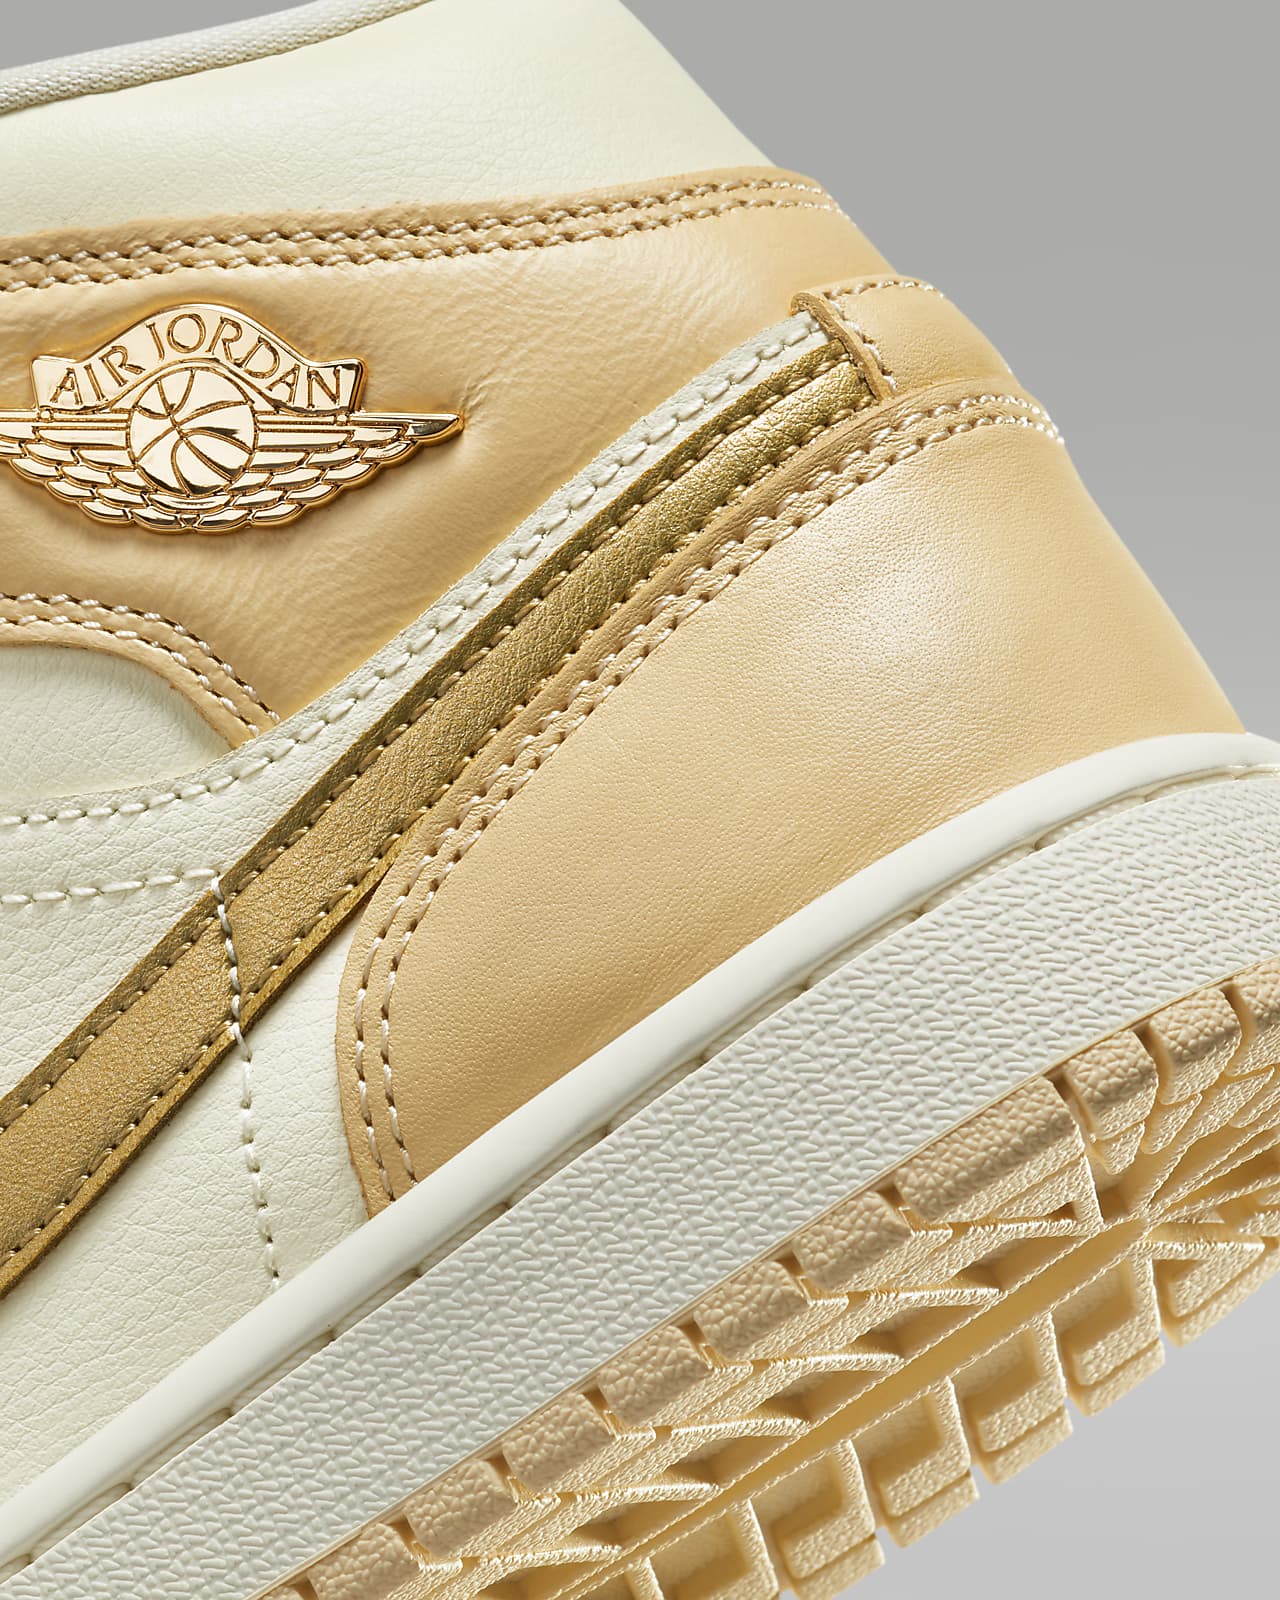 These Limited Edition Nike Air Ship Sneakers Inspired The Iconic